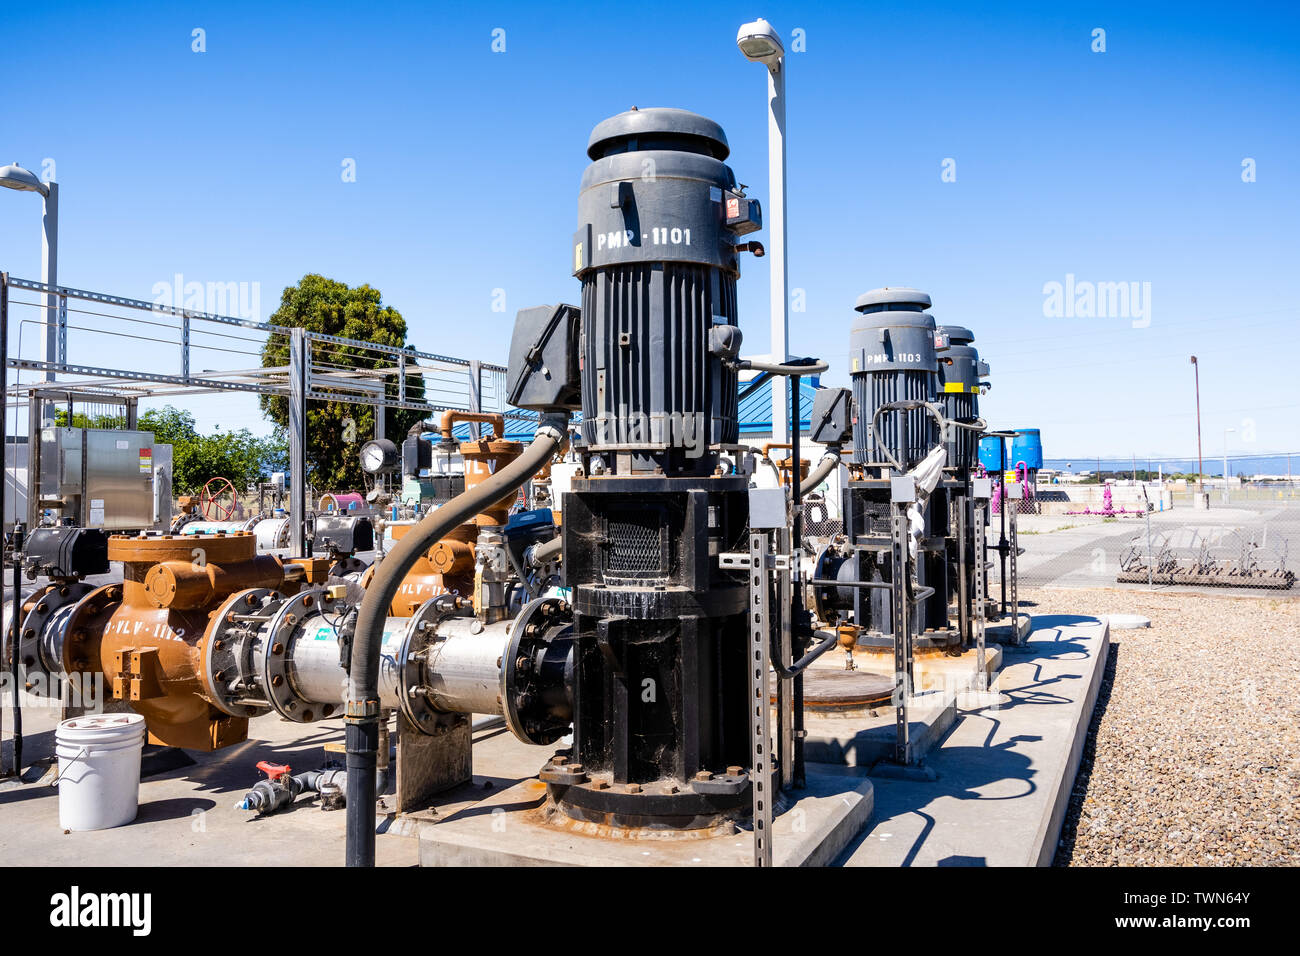 June 20, 2019 San Jose / CA / USA - Water intake pumps at Silicon Valley Advanced Water Purification Center located in South San Francisco bay area; p Stock Photo